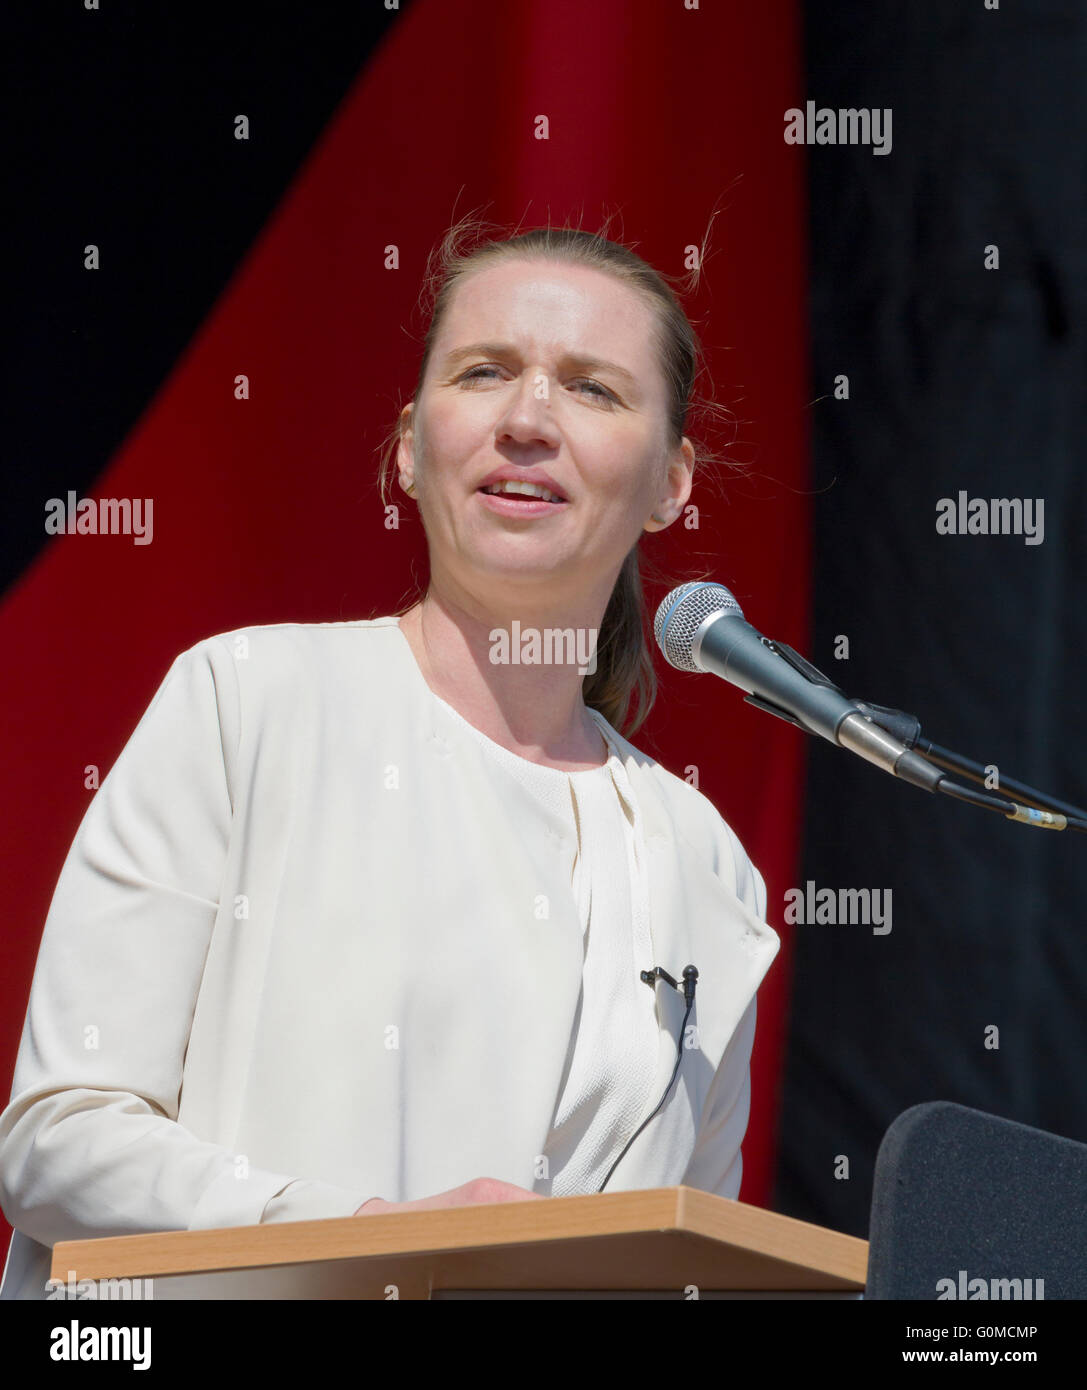 MP, Social Democrats, Mette Frederiksen speaks at the International Workers’ Day, Labour Day, on 1st May in Faelledparken Stock Photo